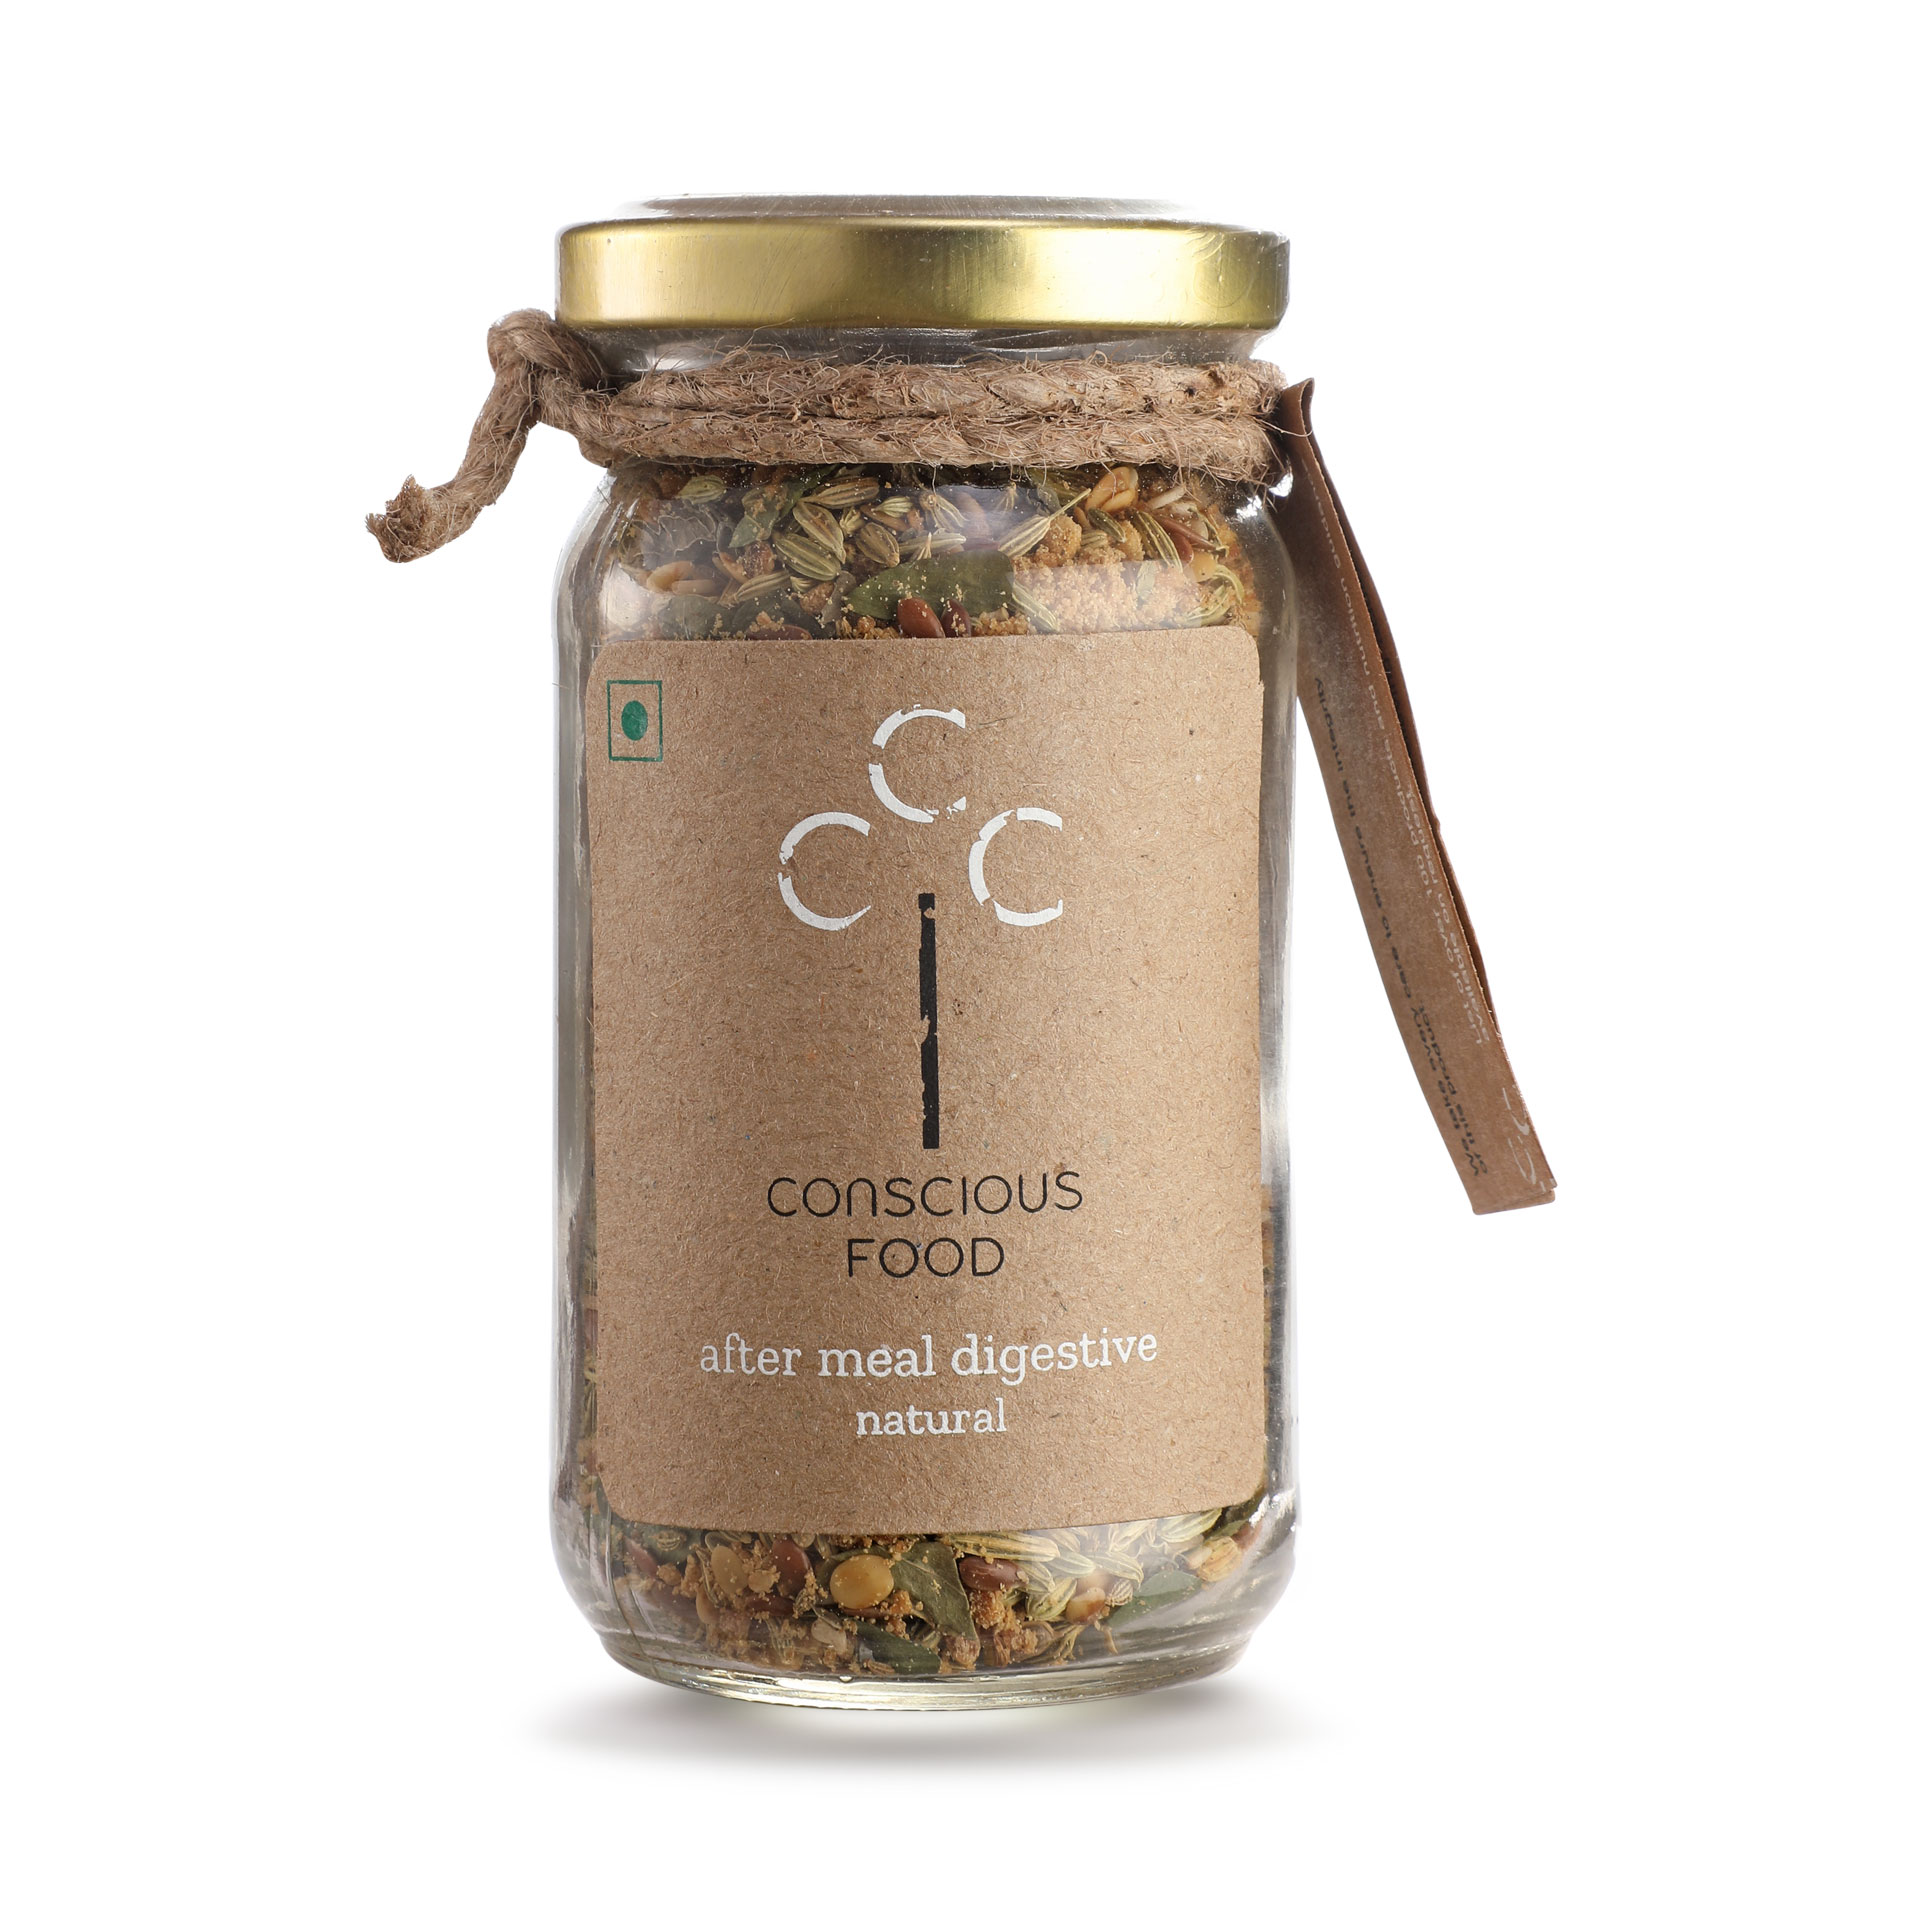 Product: Conscious Food After Meal Digestive 100g